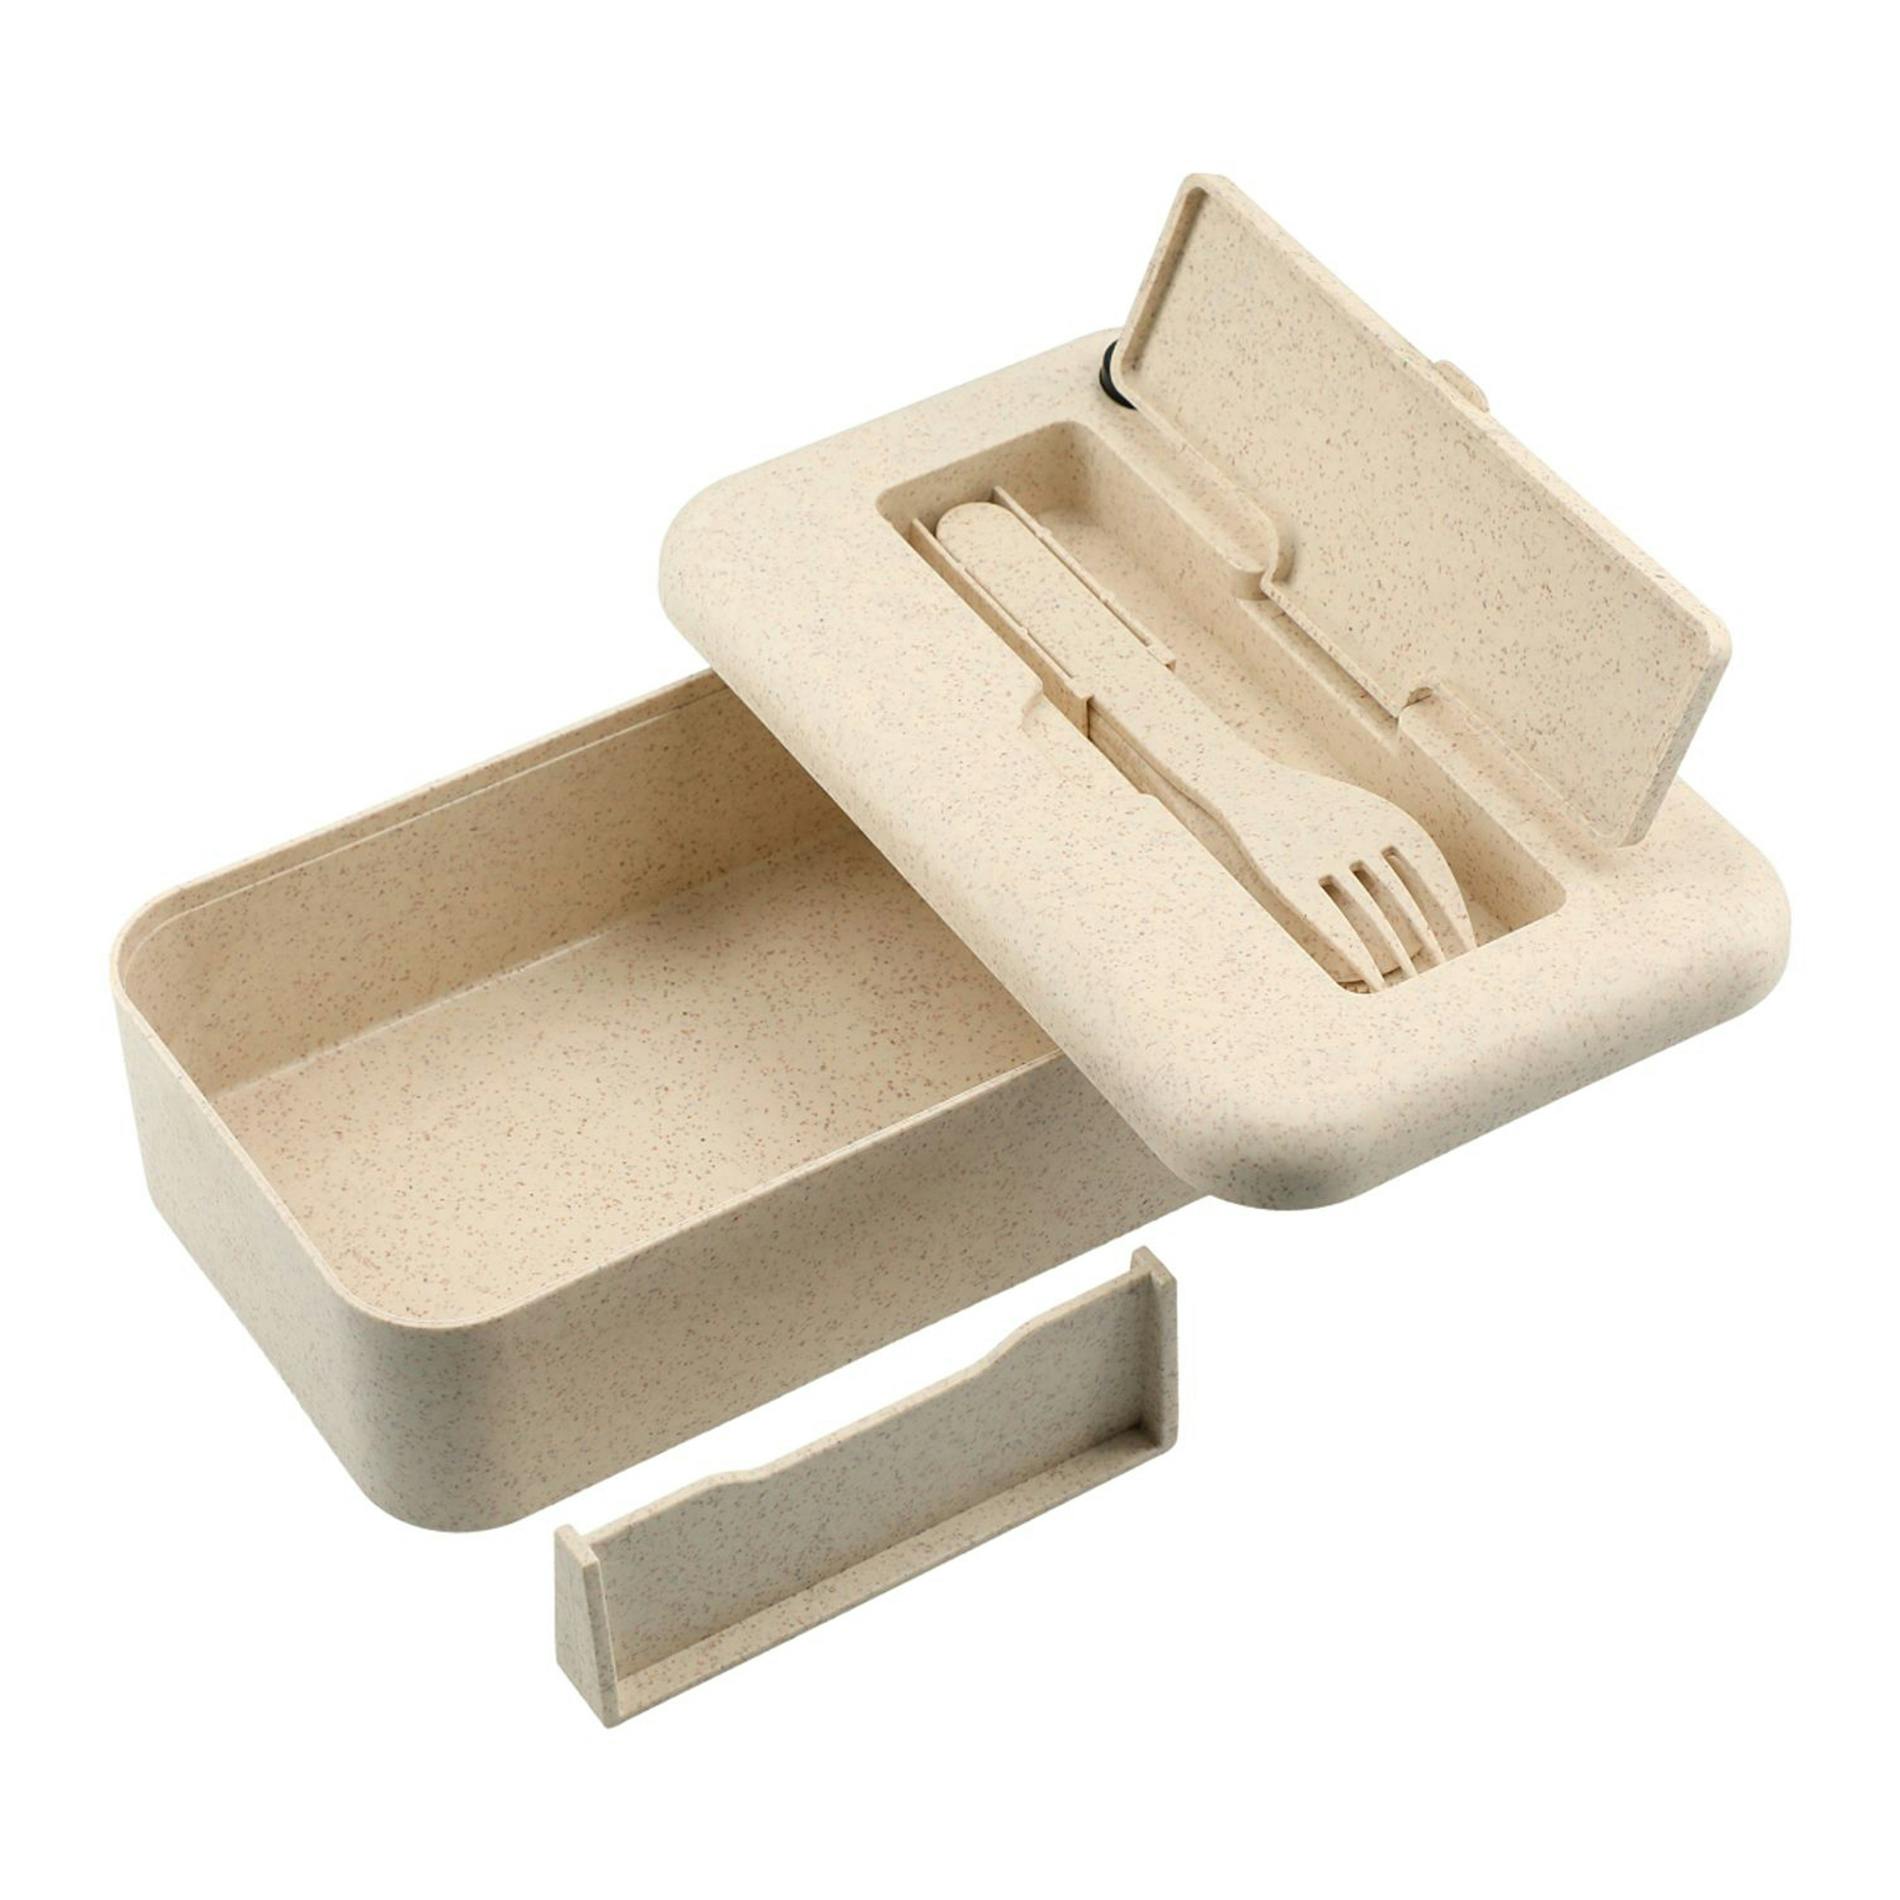 Bamboo Fiber Lunch Box with Utensils - additional Image 4